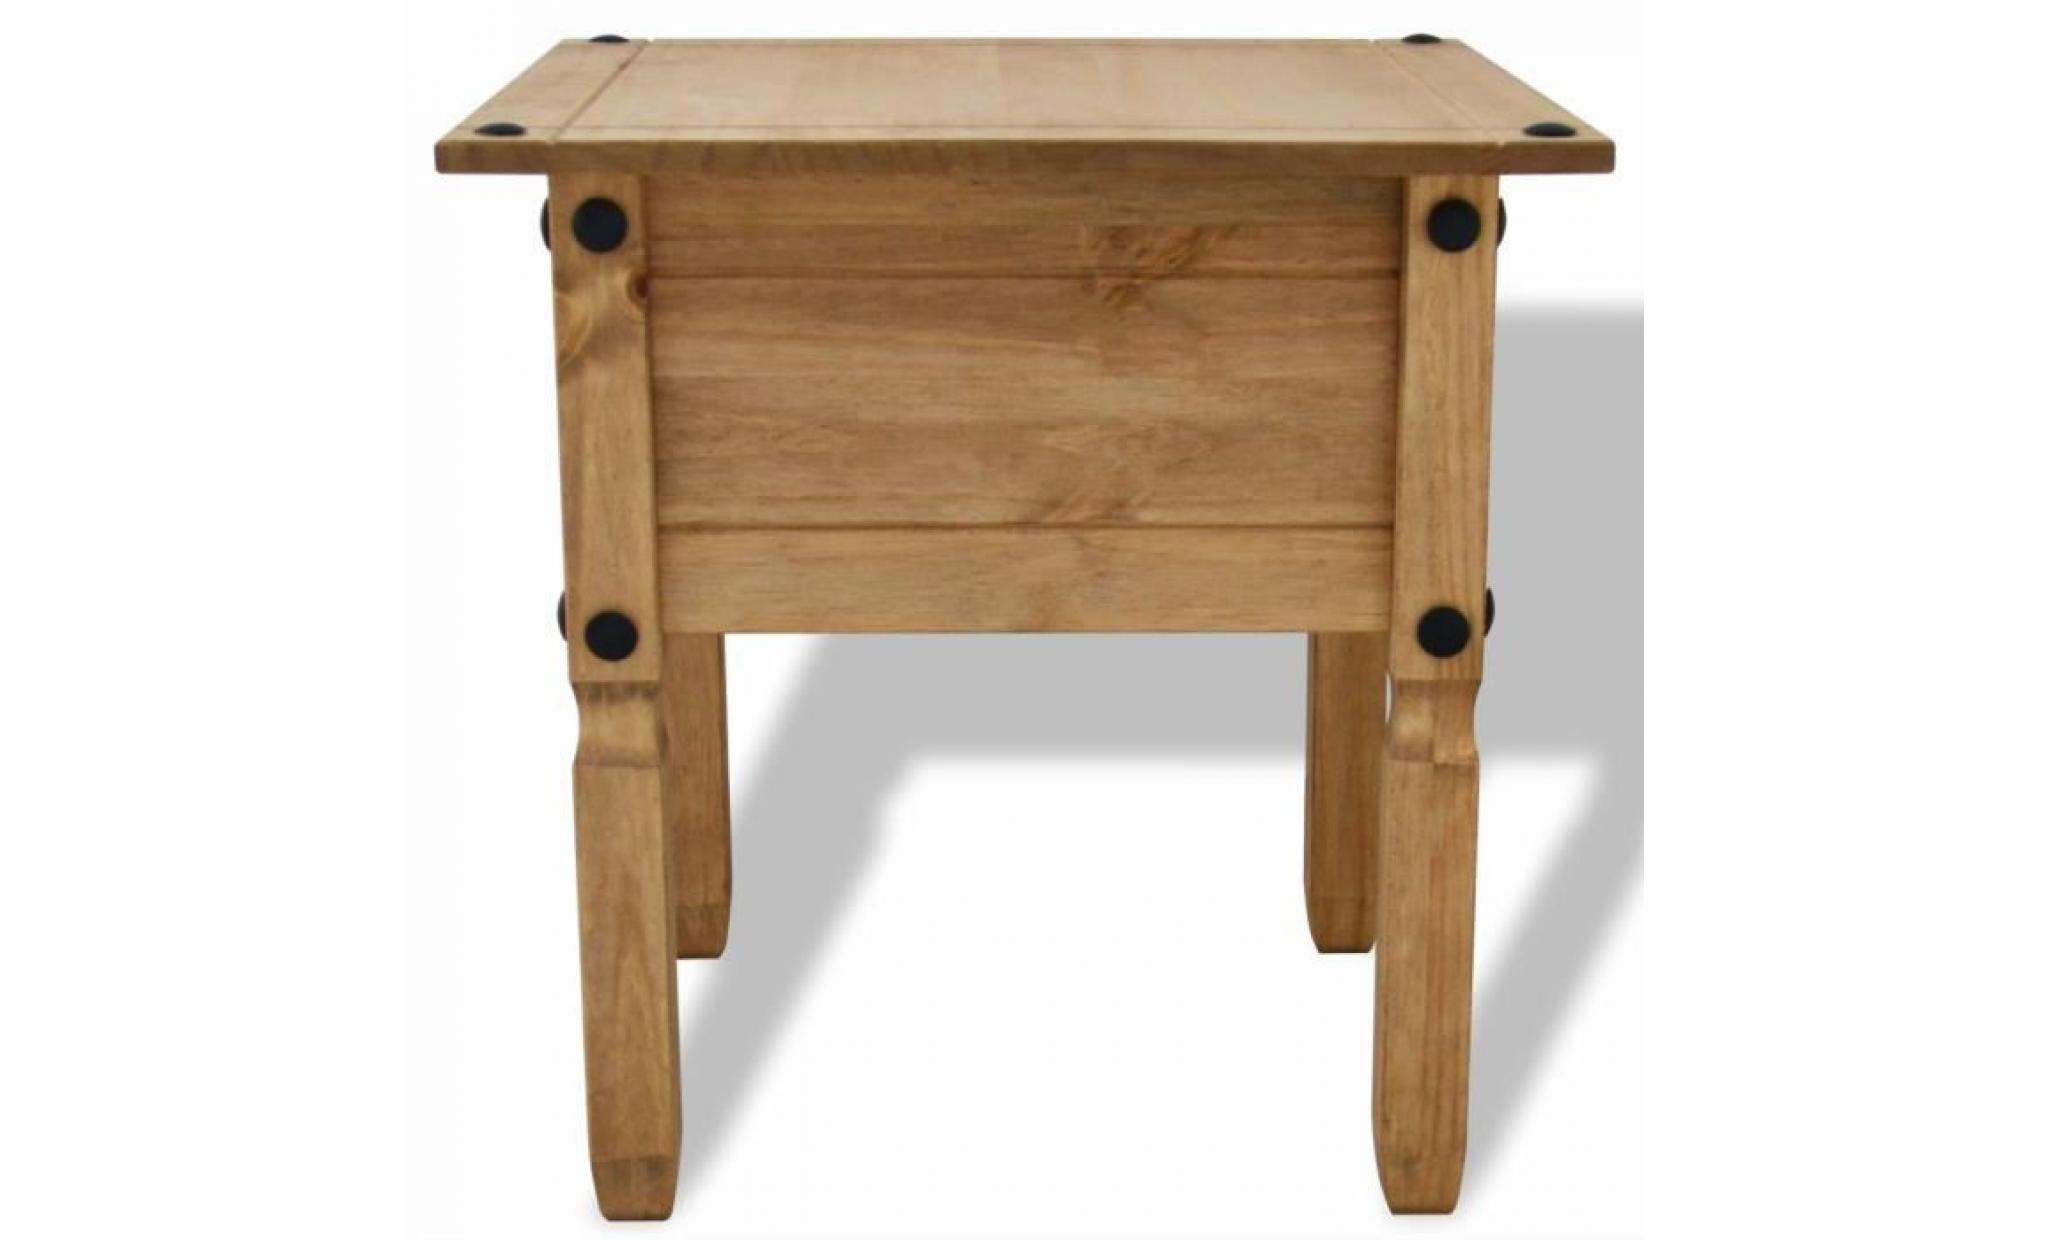 table d'appoint pin mexicain gamme corona 53,5 x 53,5 x 55 cm pas cher